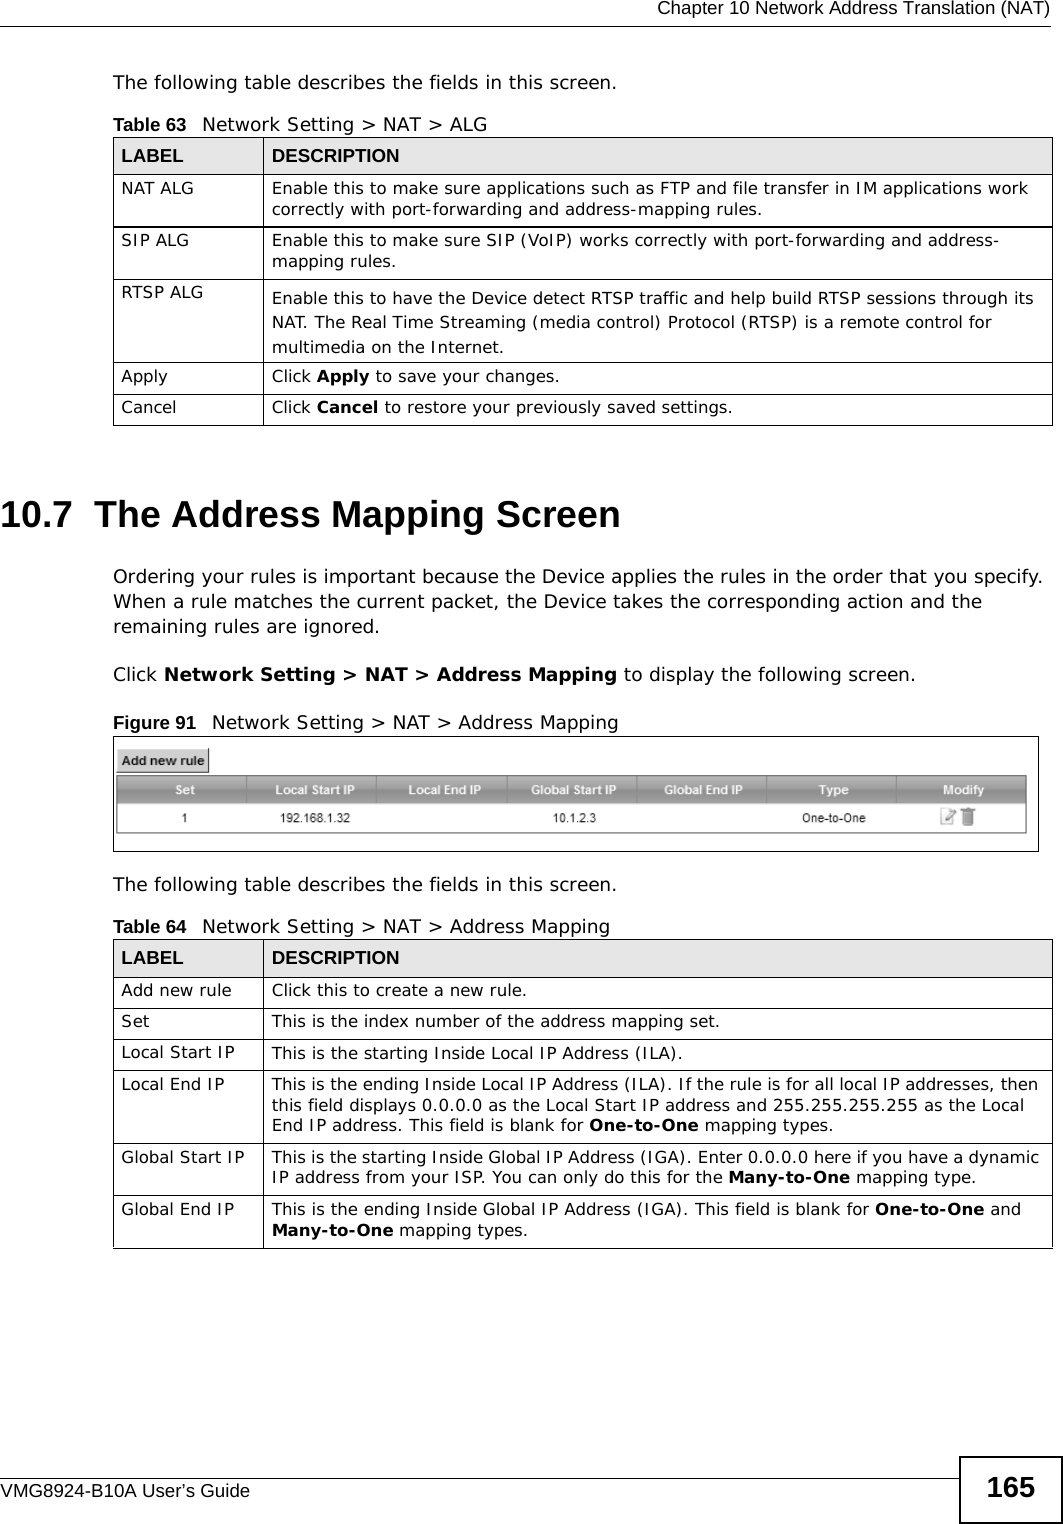  Chapter 10 Network Address Translation (NAT)VMG8924-B10A User’s Guide 165The following table describes the fields in this screen.10.7  The Address Mapping ScreenOrdering your rules is important because the Device applies the rules in the order that you specify. When a rule matches the current packet, the Device takes the corresponding action and the remaining rules are ignored. Click Network Setting &gt; NAT &gt; Address Mapping to display the following screen. Figure 91   Network Setting &gt; NAT &gt; Address MappingThe following table describes the fields in this screen.Table 63   Network Setting &gt; NAT &gt; ALGLABEL DESCRIPTIONNAT ALG Enable this to make sure applications such as FTP and file transfer in IM applications work correctly with port-forwarding and address-mapping rules.SIP ALG Enable this to make sure SIP (VoIP) works correctly with port-forwarding and address-mapping rules.RTSP ALG Enable this to have the Device detect RTSP traffic and help build RTSP sessions through its NAT. The Real Time Streaming (media control) Protocol (RTSP) is a remote control for multimedia on the Internet.Apply Click Apply to save your changes.Cancel Click Cancel to restore your previously saved settings.Table 64   Network Setting &gt; NAT &gt; Address MappingLABEL DESCRIPTIONAdd new rule Click this to create a new rule.Set This is the index number of the address mapping set.Local Start IP This is the starting Inside Local IP Address (ILA).Local End IP This is the ending Inside Local IP Address (ILA). If the rule is for all local IP addresses, then this field displays 0.0.0.0 as the Local Start IP address and 255.255.255.255 as the Local End IP address. This field is blank for One-to-One mapping types.Global Start IP This is the starting Inside Global IP Address (IGA). Enter 0.0.0.0 here if you have a dynamic IP address from your ISP. You can only do this for the Many-to-One mapping type. Global End IP This is the ending Inside Global IP Address (IGA). This field is blank for One-to-One and Many-to-One mapping types.